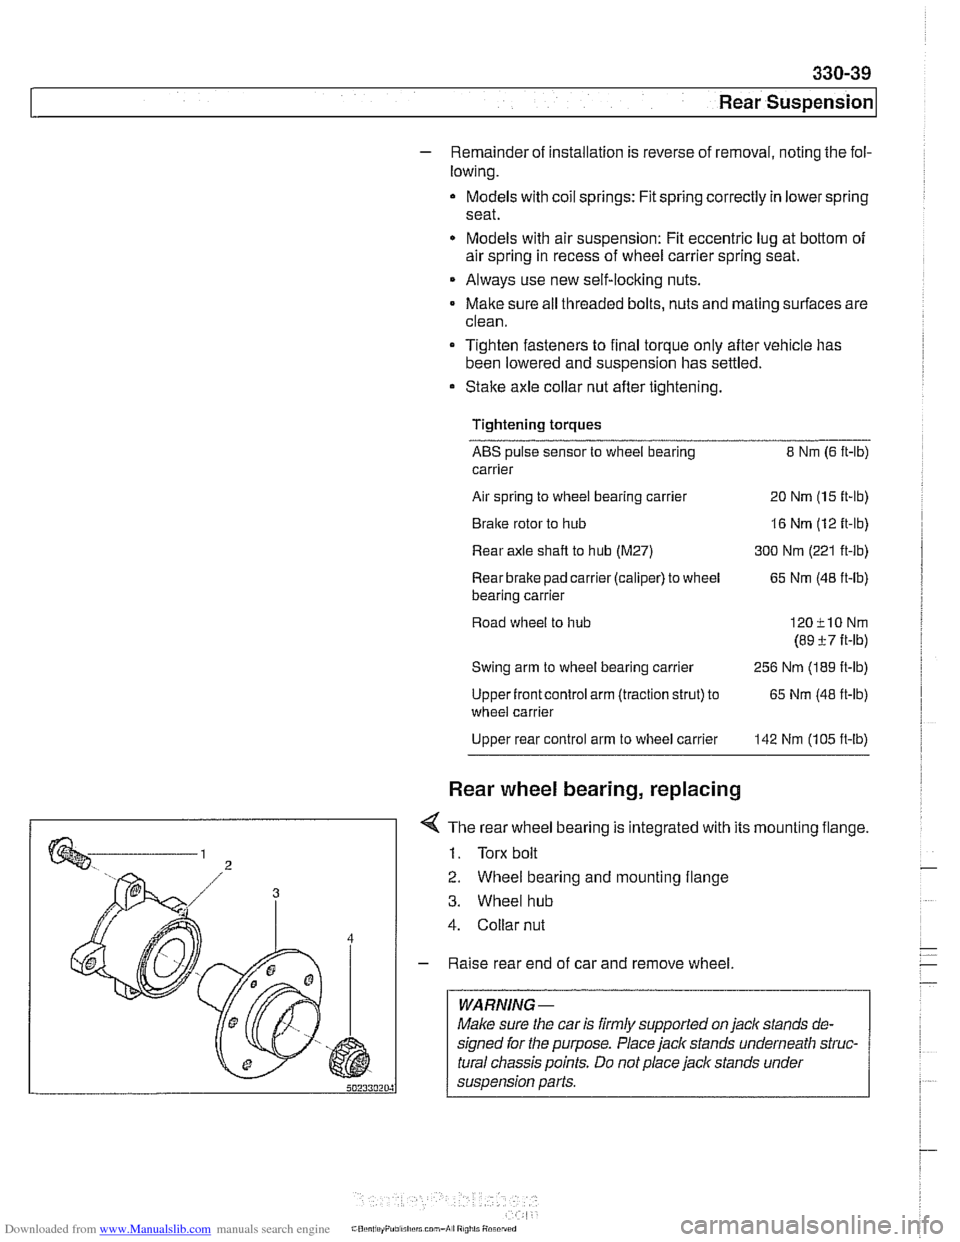 BMW 528i 1998 E39 User Guide Downloaded from www.Manualslib.com manuals search engine 
330-39 
I Rear suspension1 
- Remainder of installation is  reverse of removal, noting  the fol- 
lowing. 
Models  with coil springs:  Fit  sp